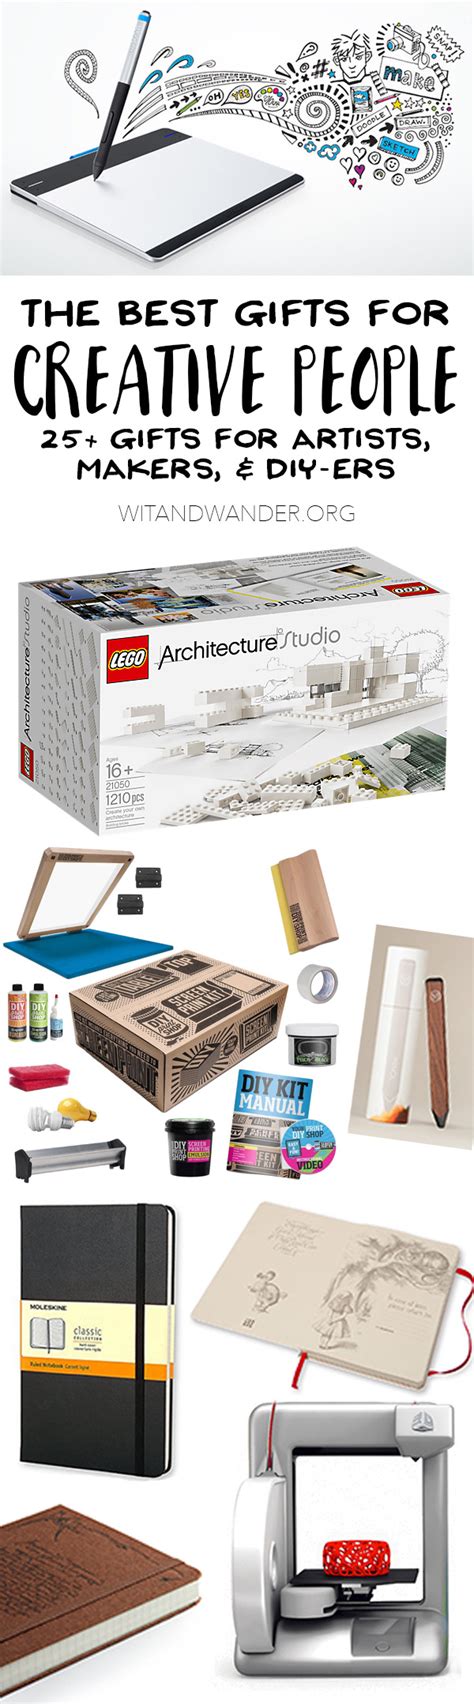 As the holiday season approaches, here are 8 great gift ideas for the organized and productive person who has it all. The Absolute Best Gifts for Creative People: Artists ...